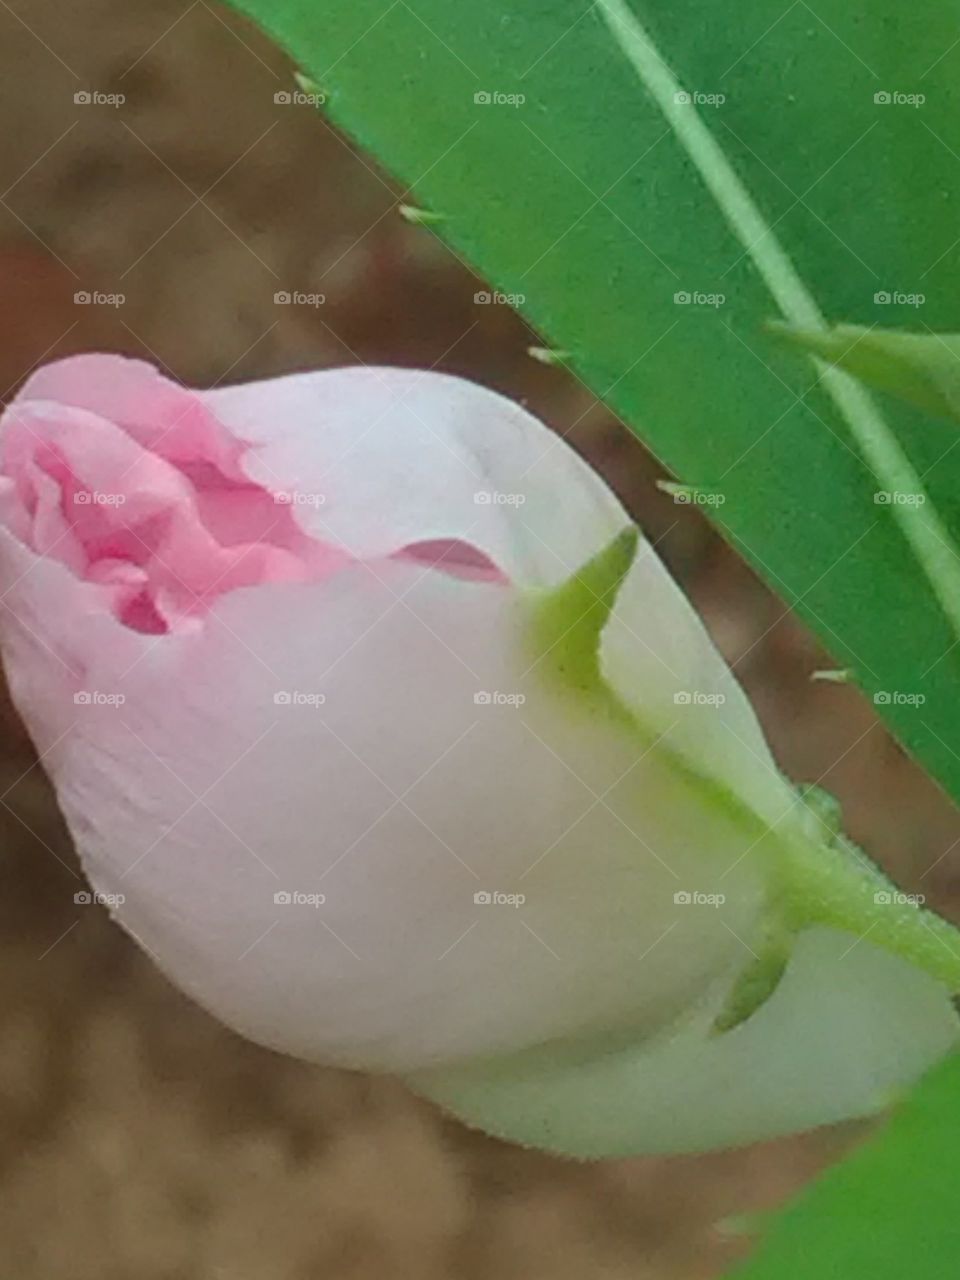 This pink flower is surrounded by flowers trying to hide beauty inside it.